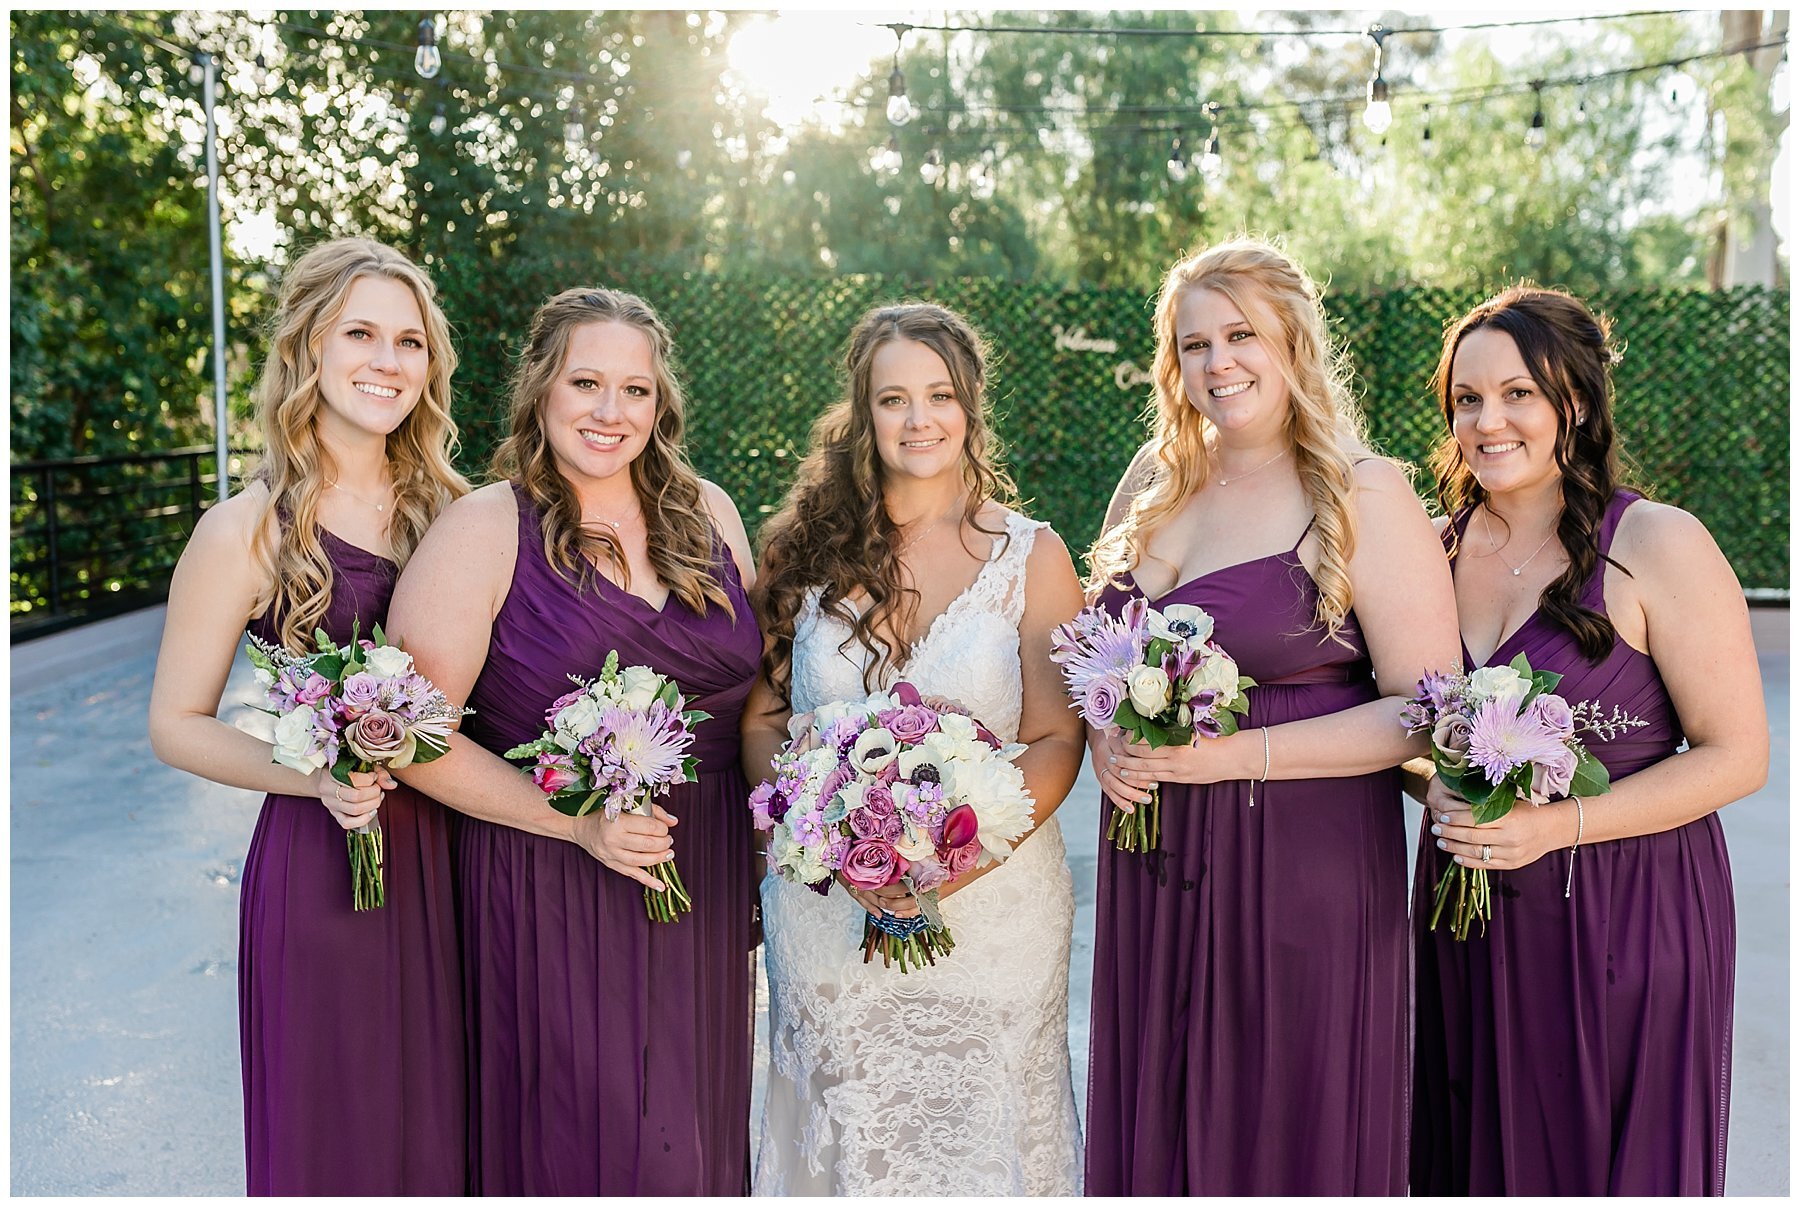  bride with her bridal party  